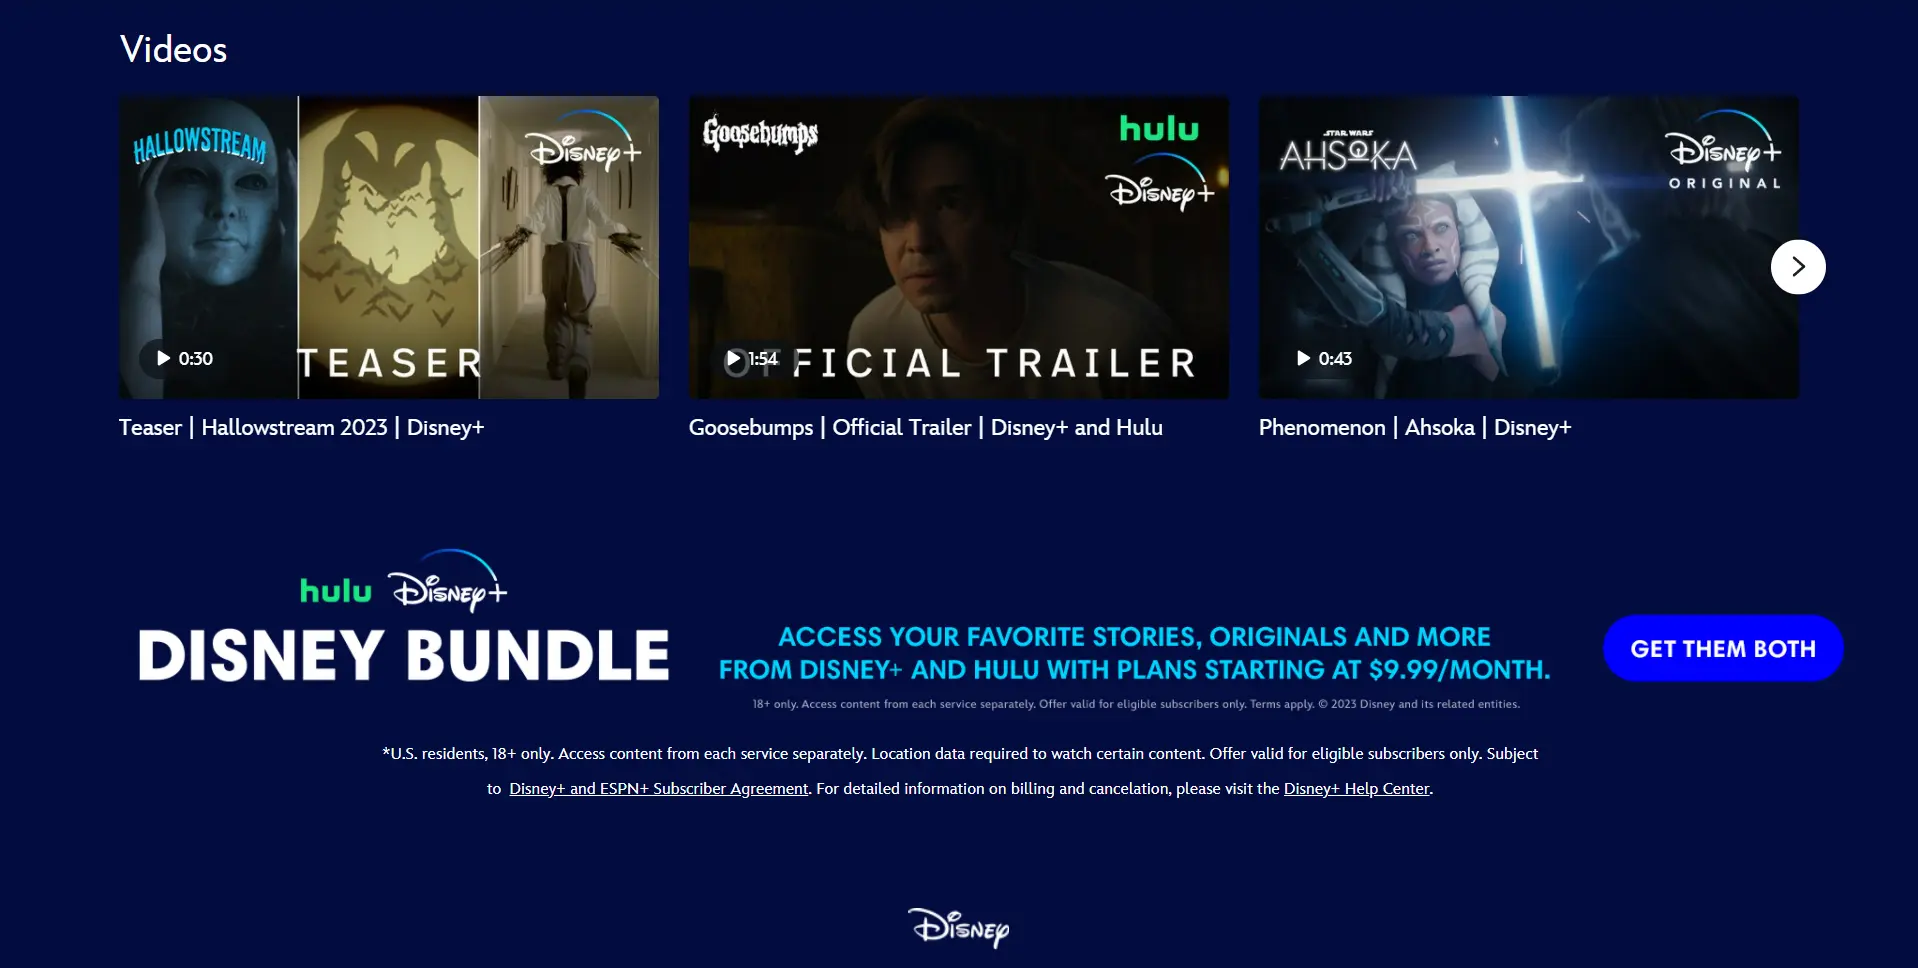 visit disneyplus.com where user will need to sign in and Purchase bundle then visit www.disneyplus.com login/begin 8 digit code to enter the code